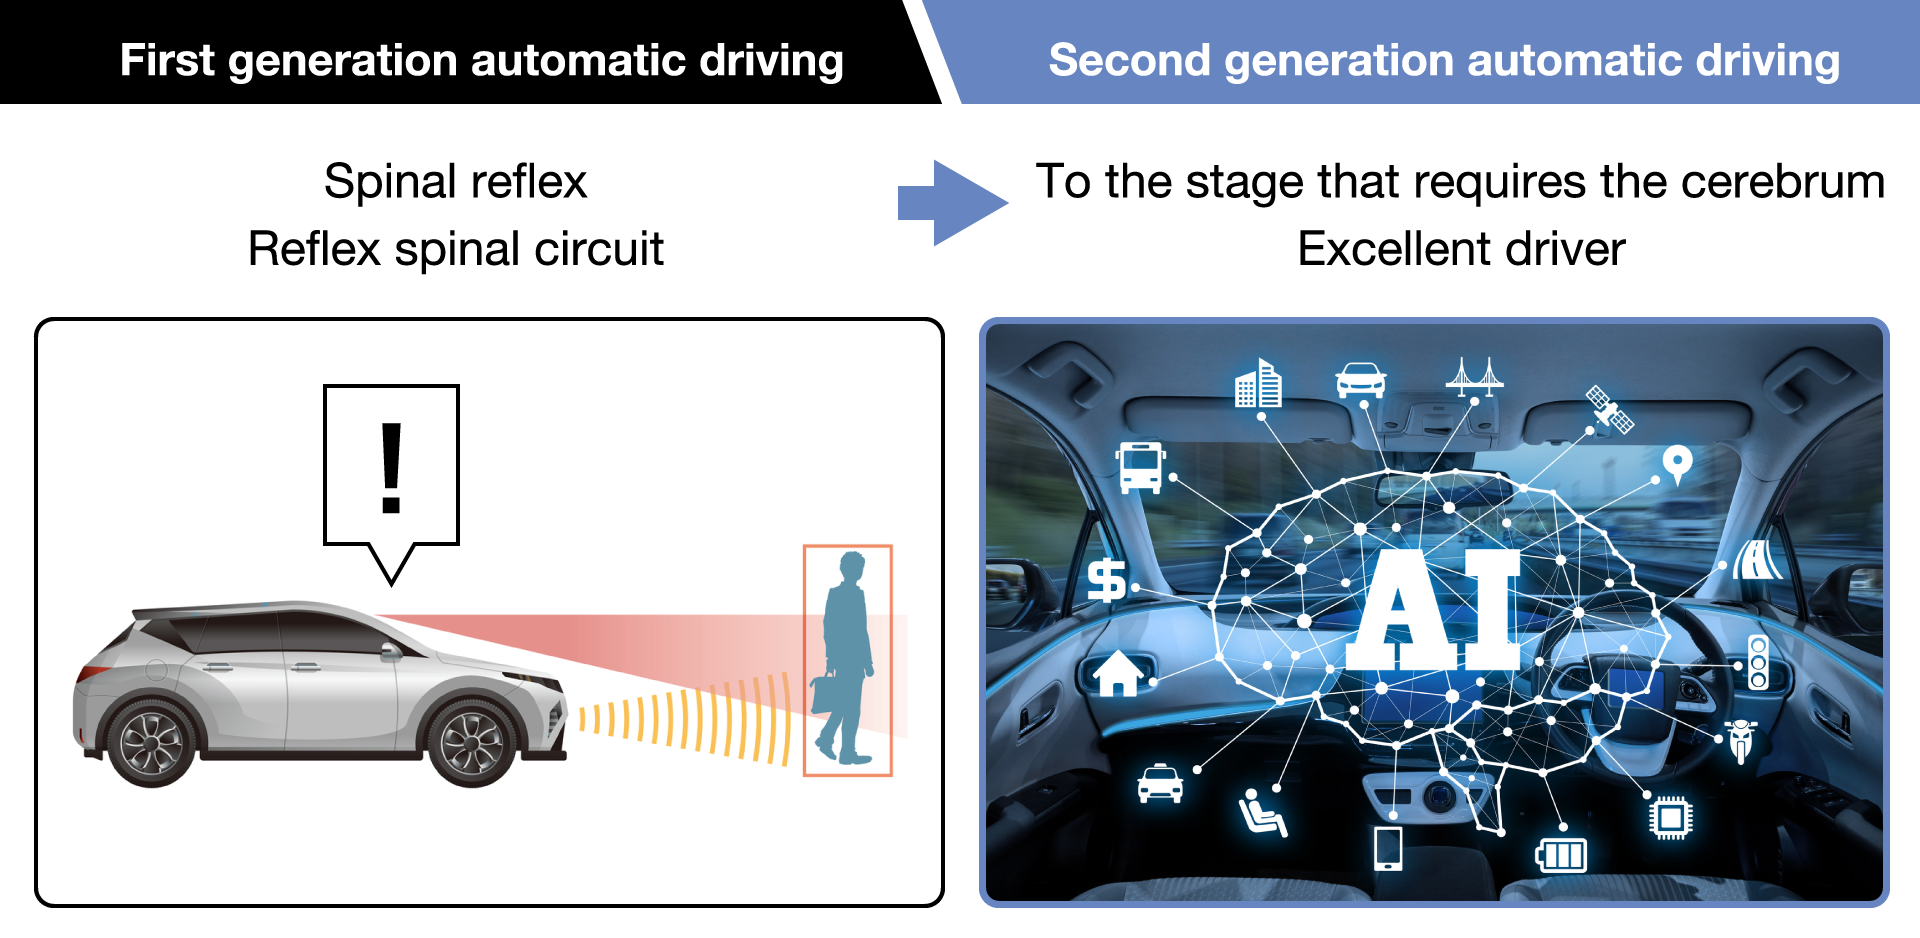 Second generation automatic driving